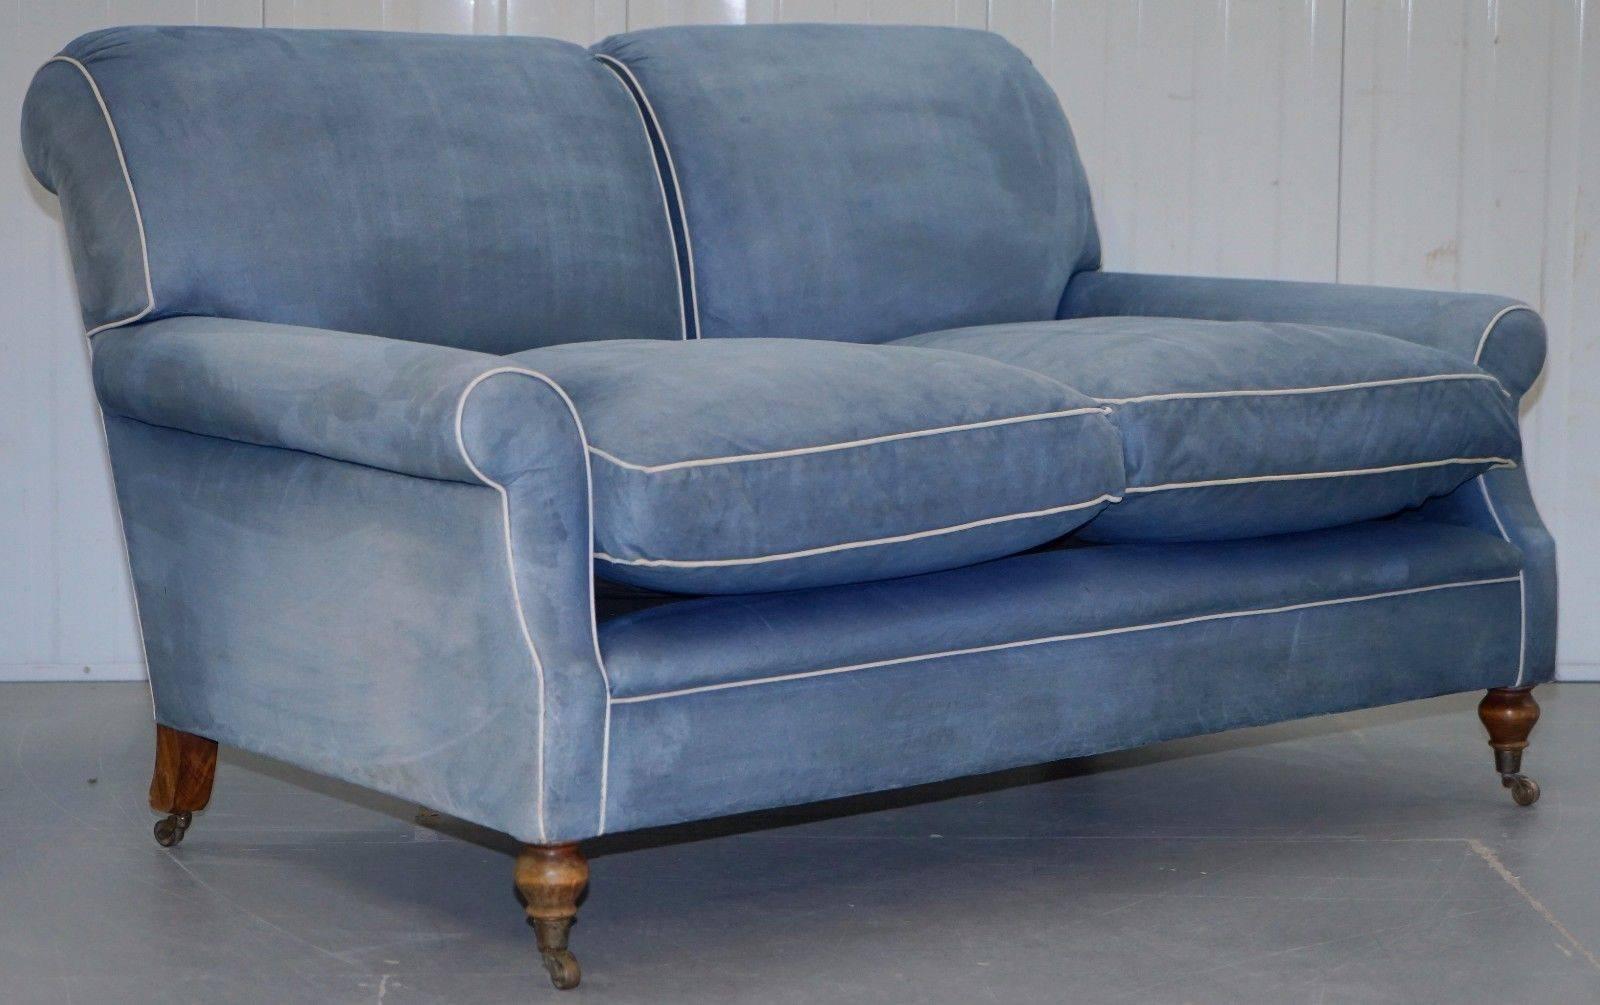 We are delighted to offer for sale this lovely RRP £10,046 George Smith Signature Laid back scroll arm two-seat sofa with feather filled cushions upholstered with premium blue suede upholstery 

This sofa has been fully and professionally